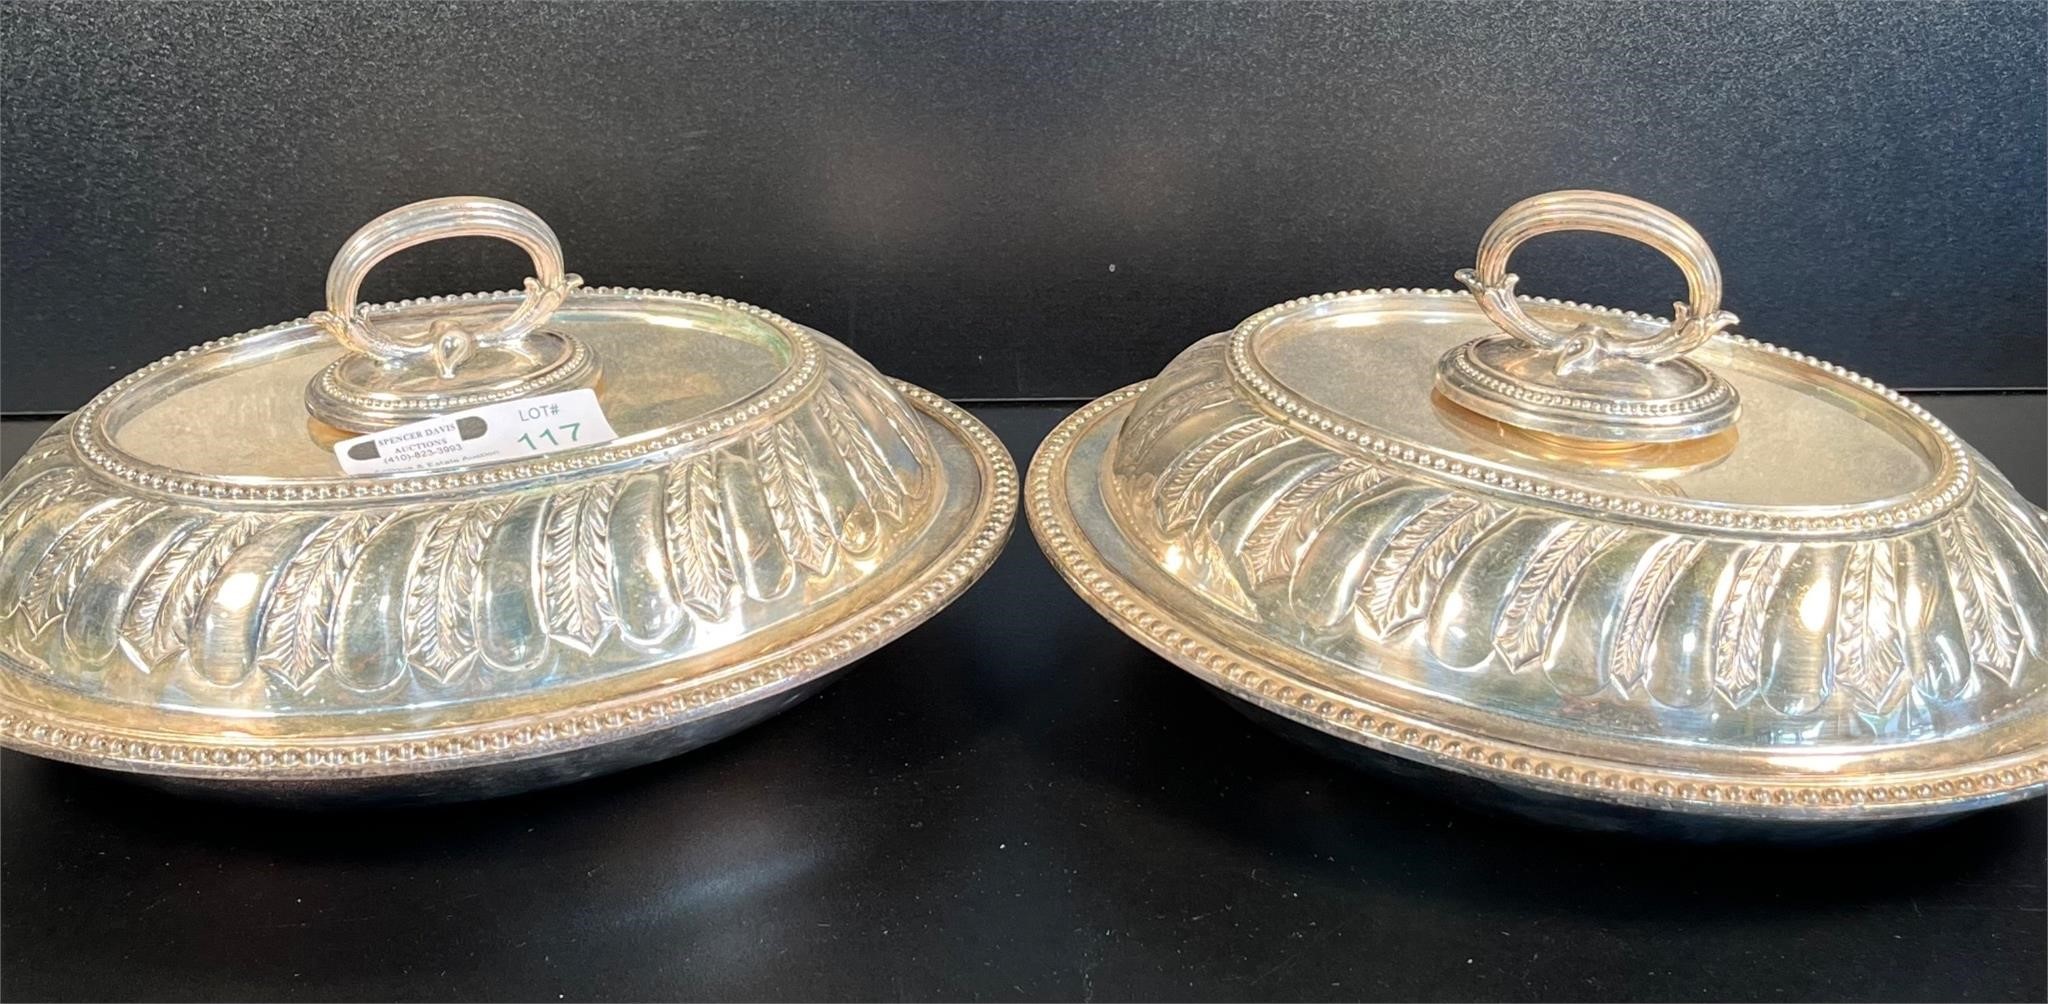 2 Oval Plated Covered Casserole Dishes